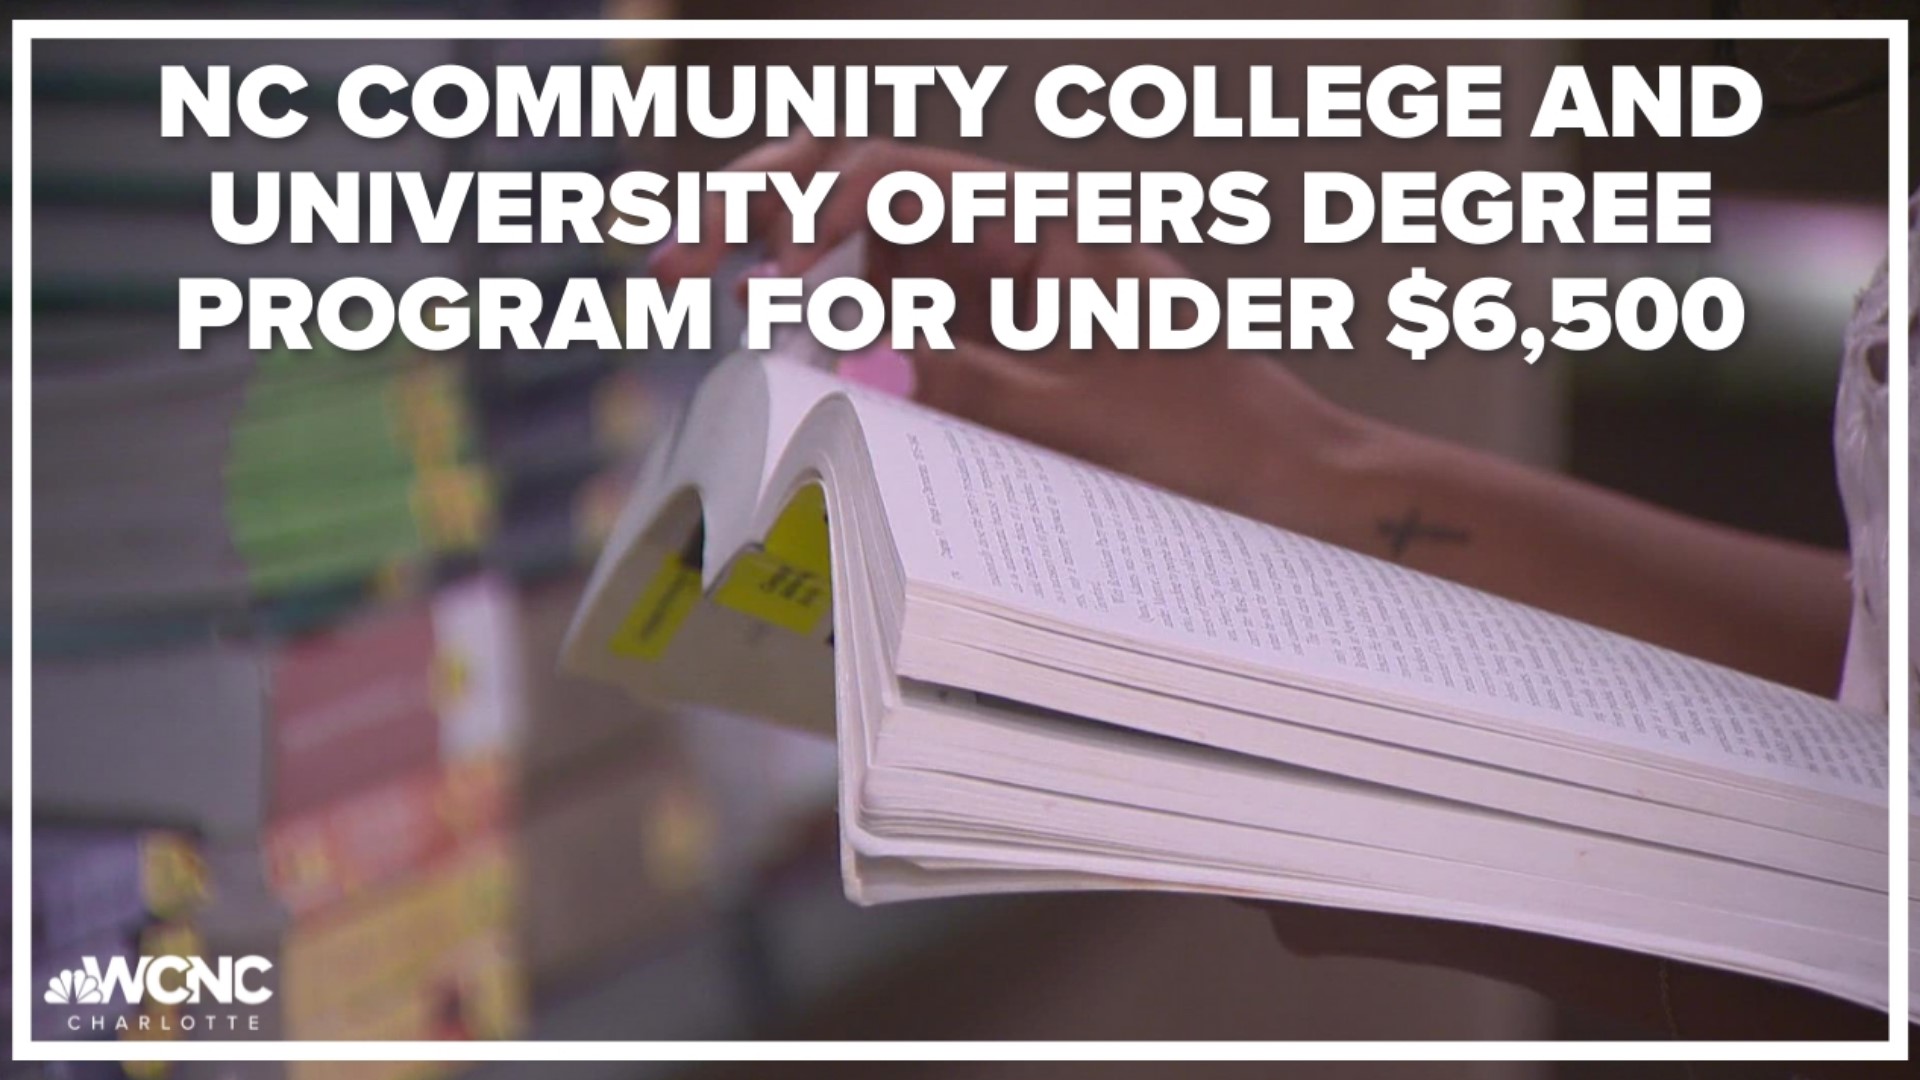 In North Carolina, the average student leaves college with more than $25,000 of debt.